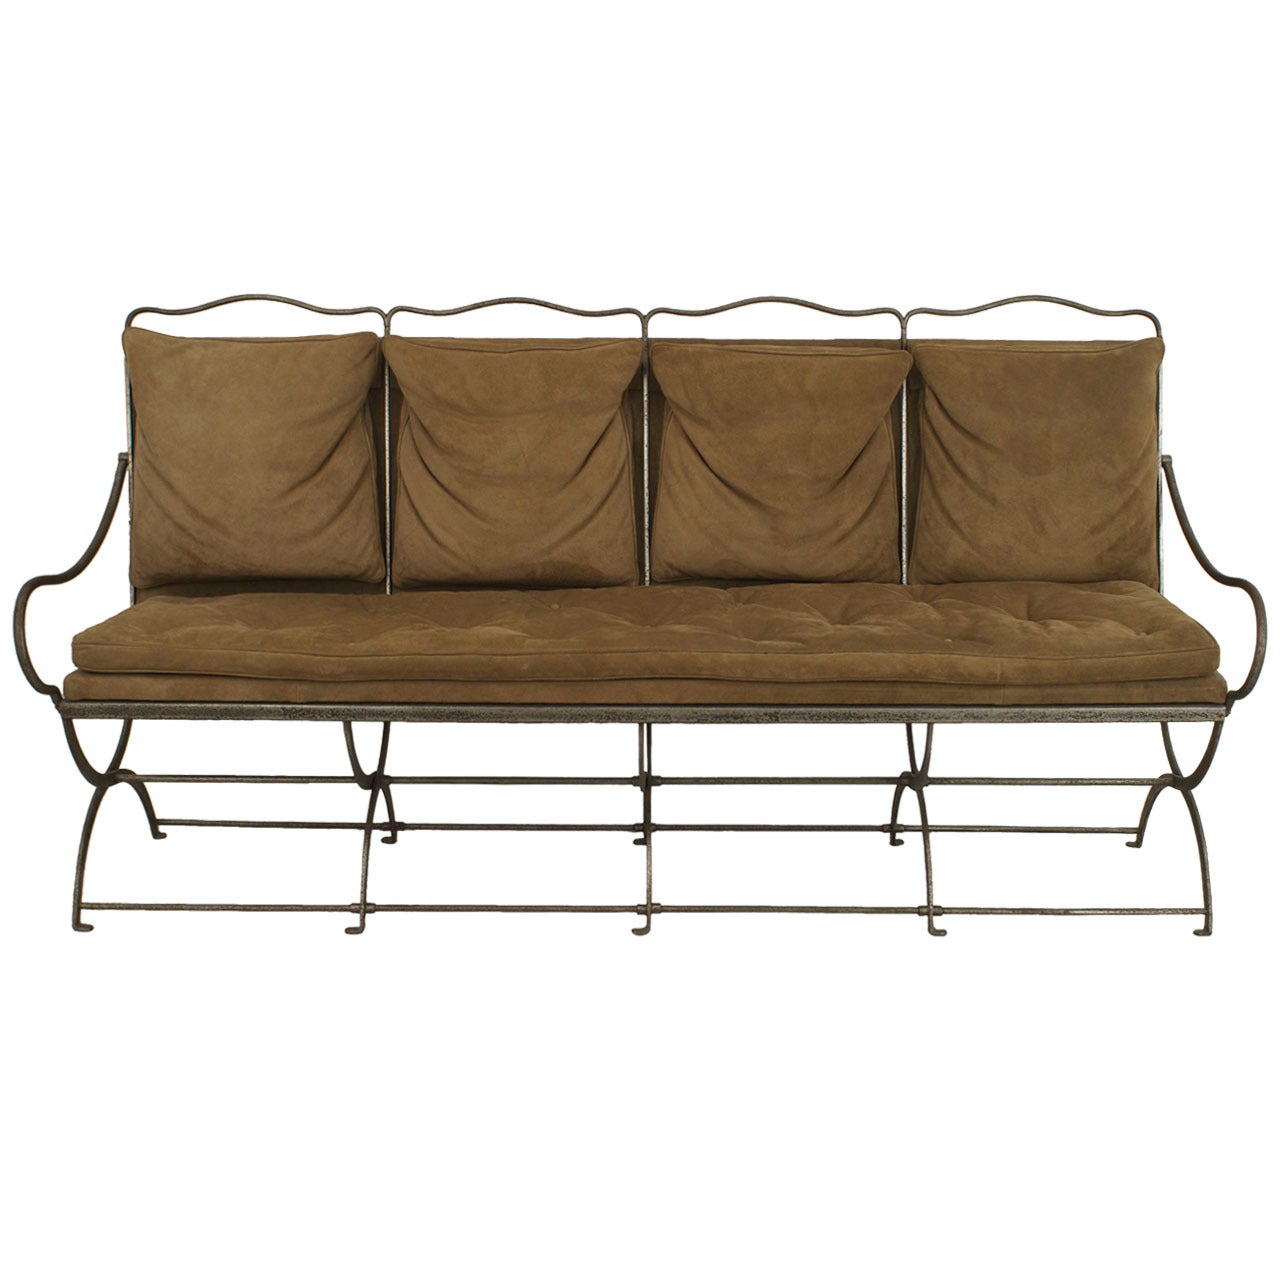 1940s French Steel Settee with Cushions